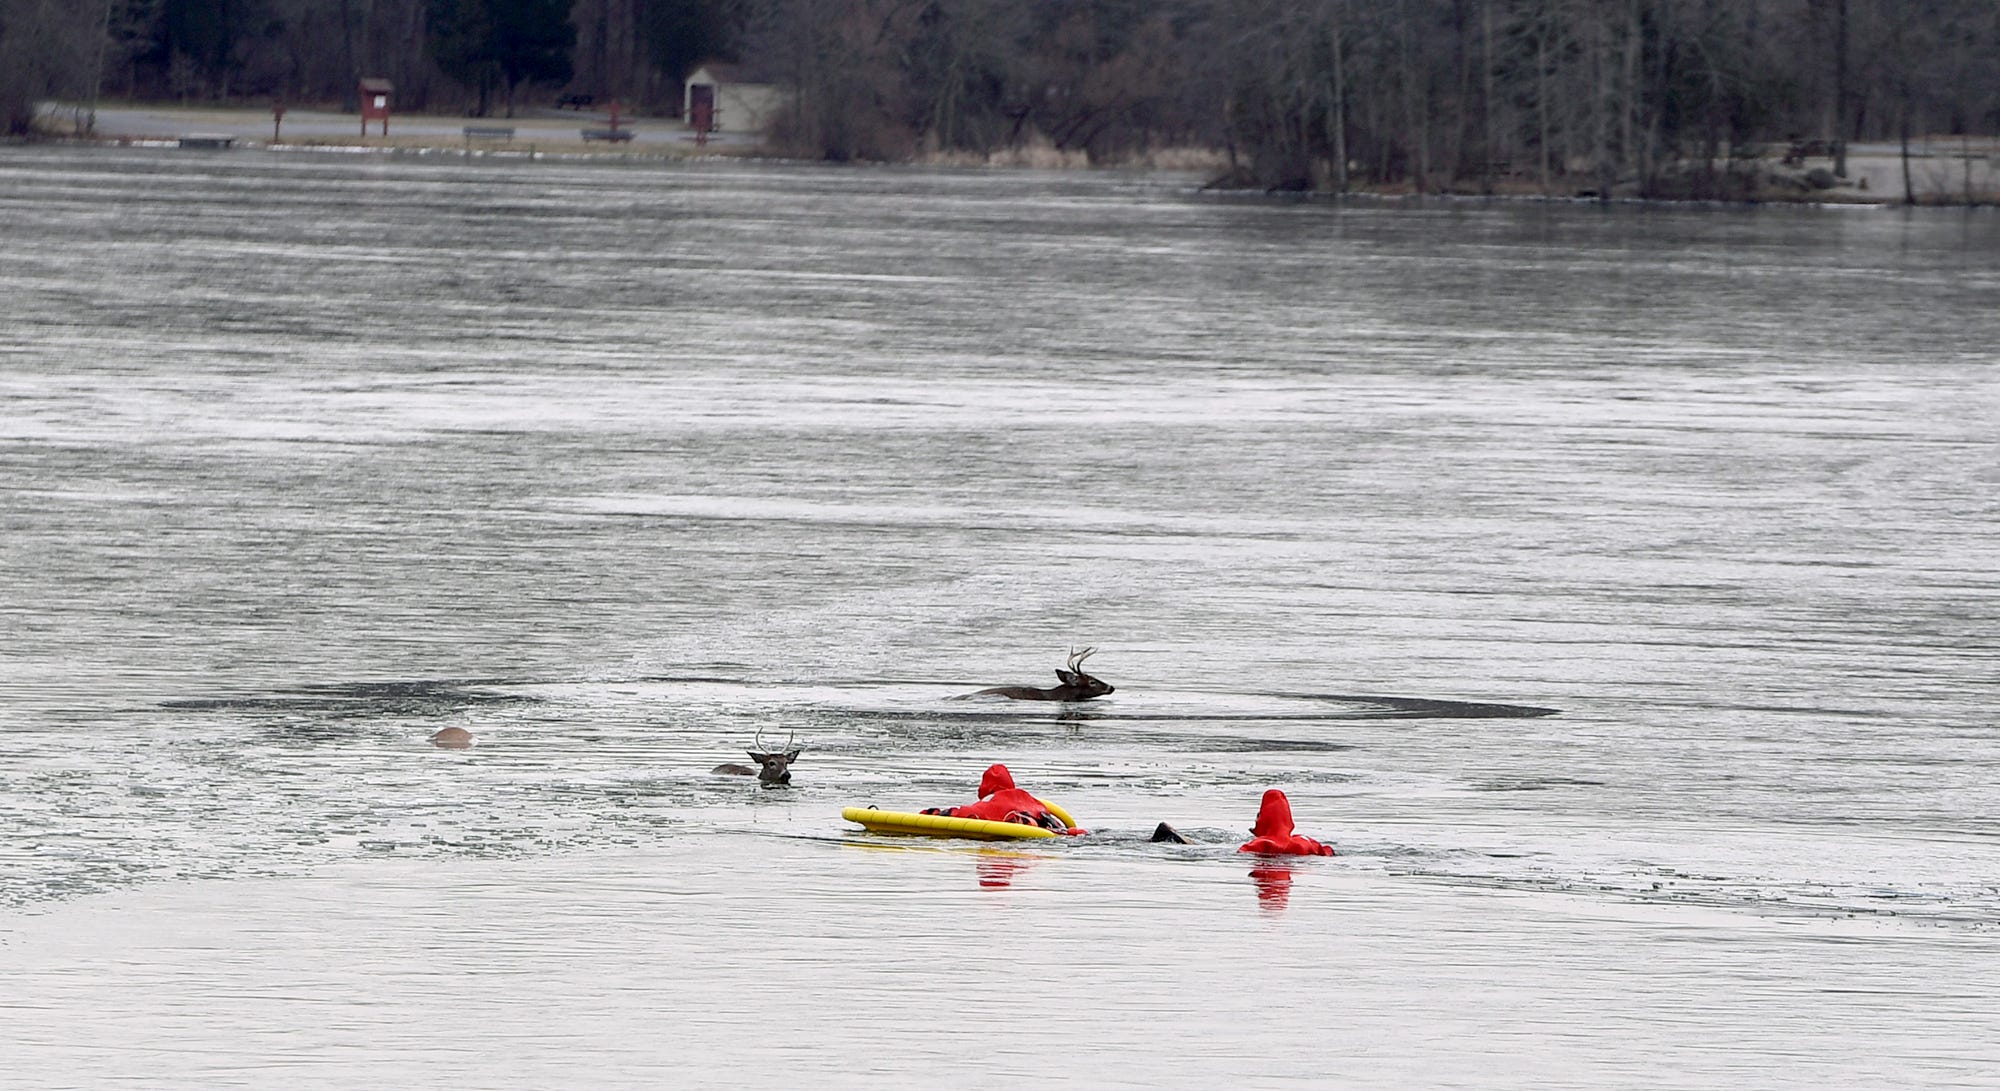 Rescue personnel and park officials attempt to rescue several deer that fell through the ice at Gifford Pinchot State Park, Saturday, January 11, 2019.
John A. Pavoncello photo